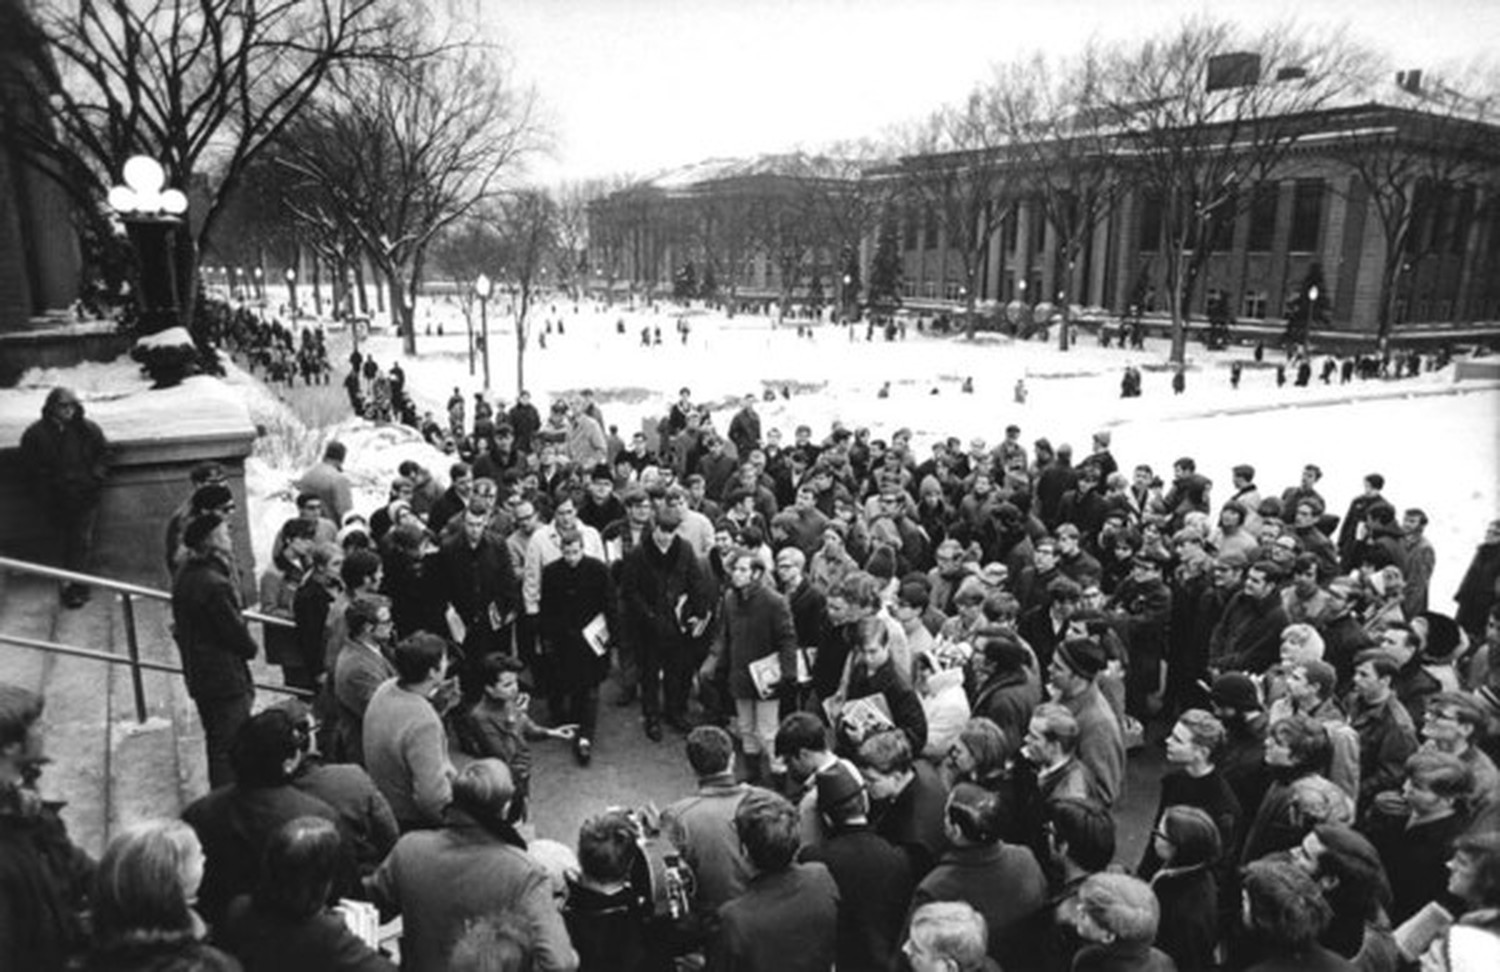 Historic image of students in the 1960s gathered around the steps of Morrill Hall listening to a speech.